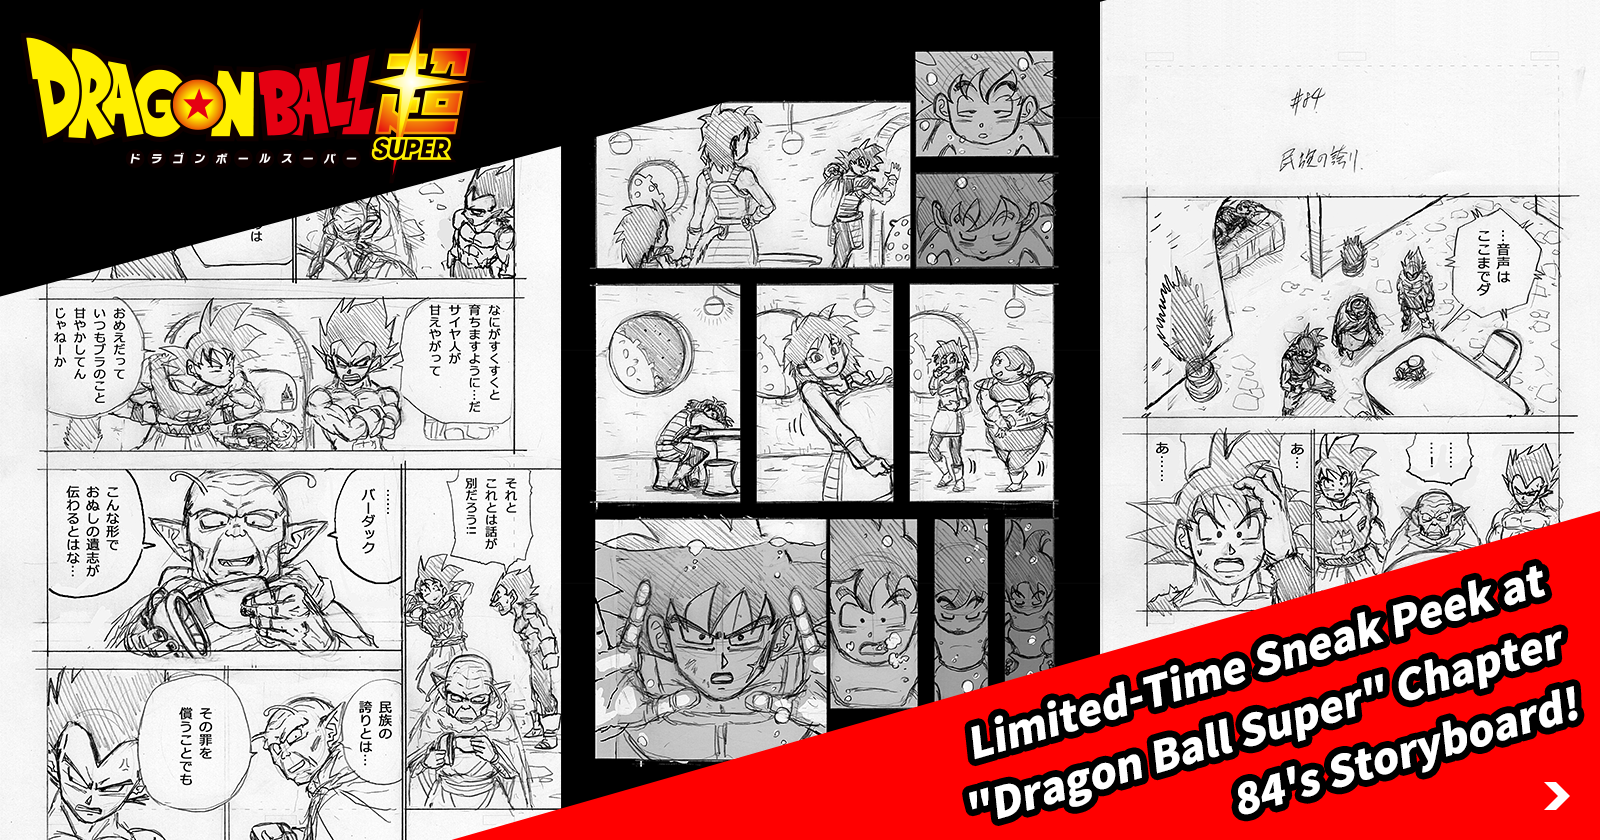 Limited-Time Sneak Peek at Dragon Ball Super Chapter 84's Storyboard! Get a Preview of the Chapter Releasing in V Jump's Super-Sized July Edition!